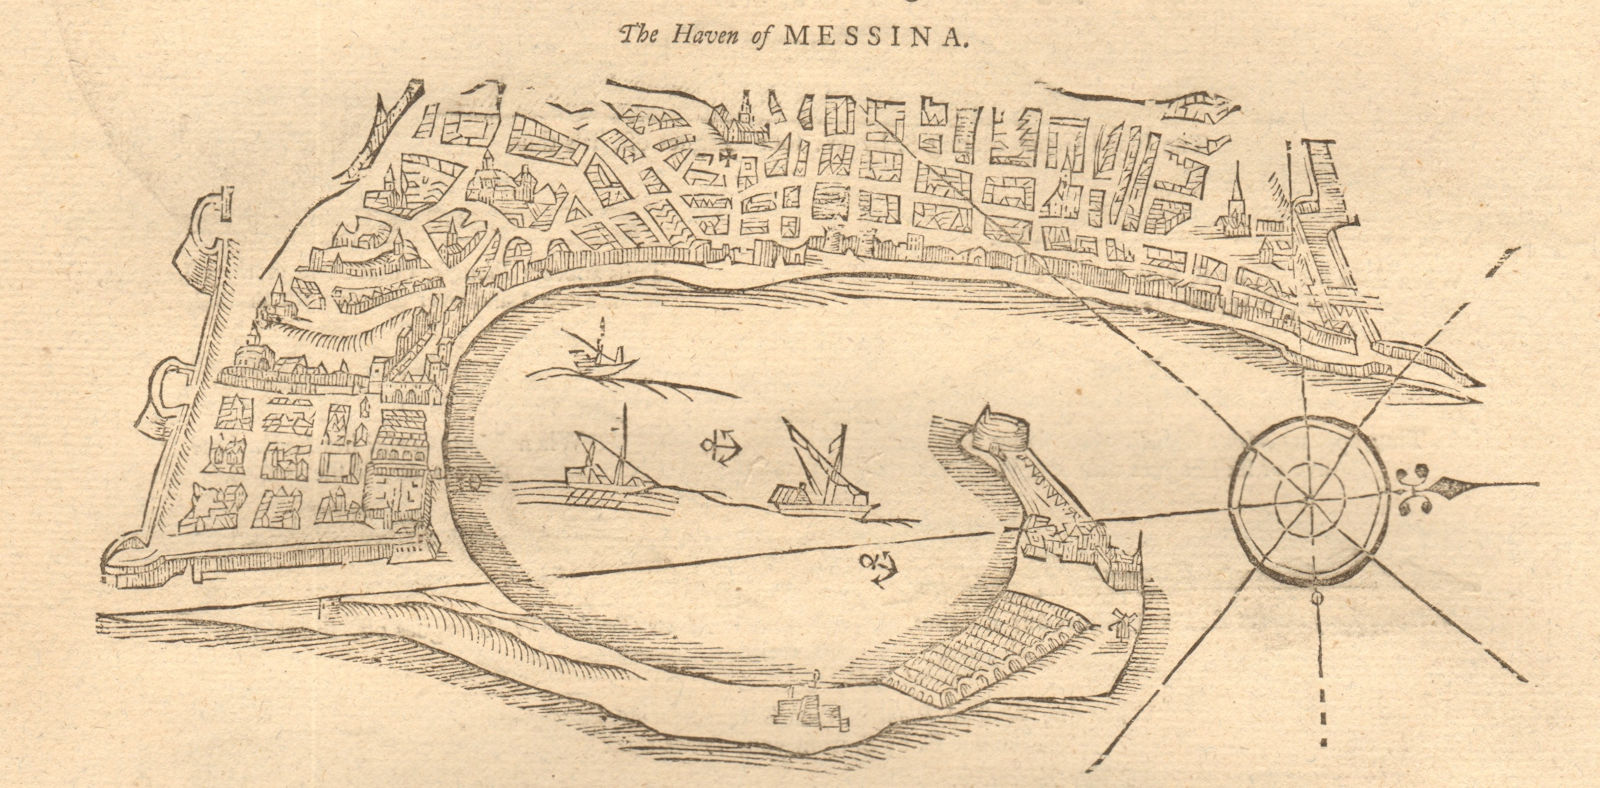 "The haven of Messina". Sicily, Italy. MOUNT & PAGE sea chart town plan 1747 map